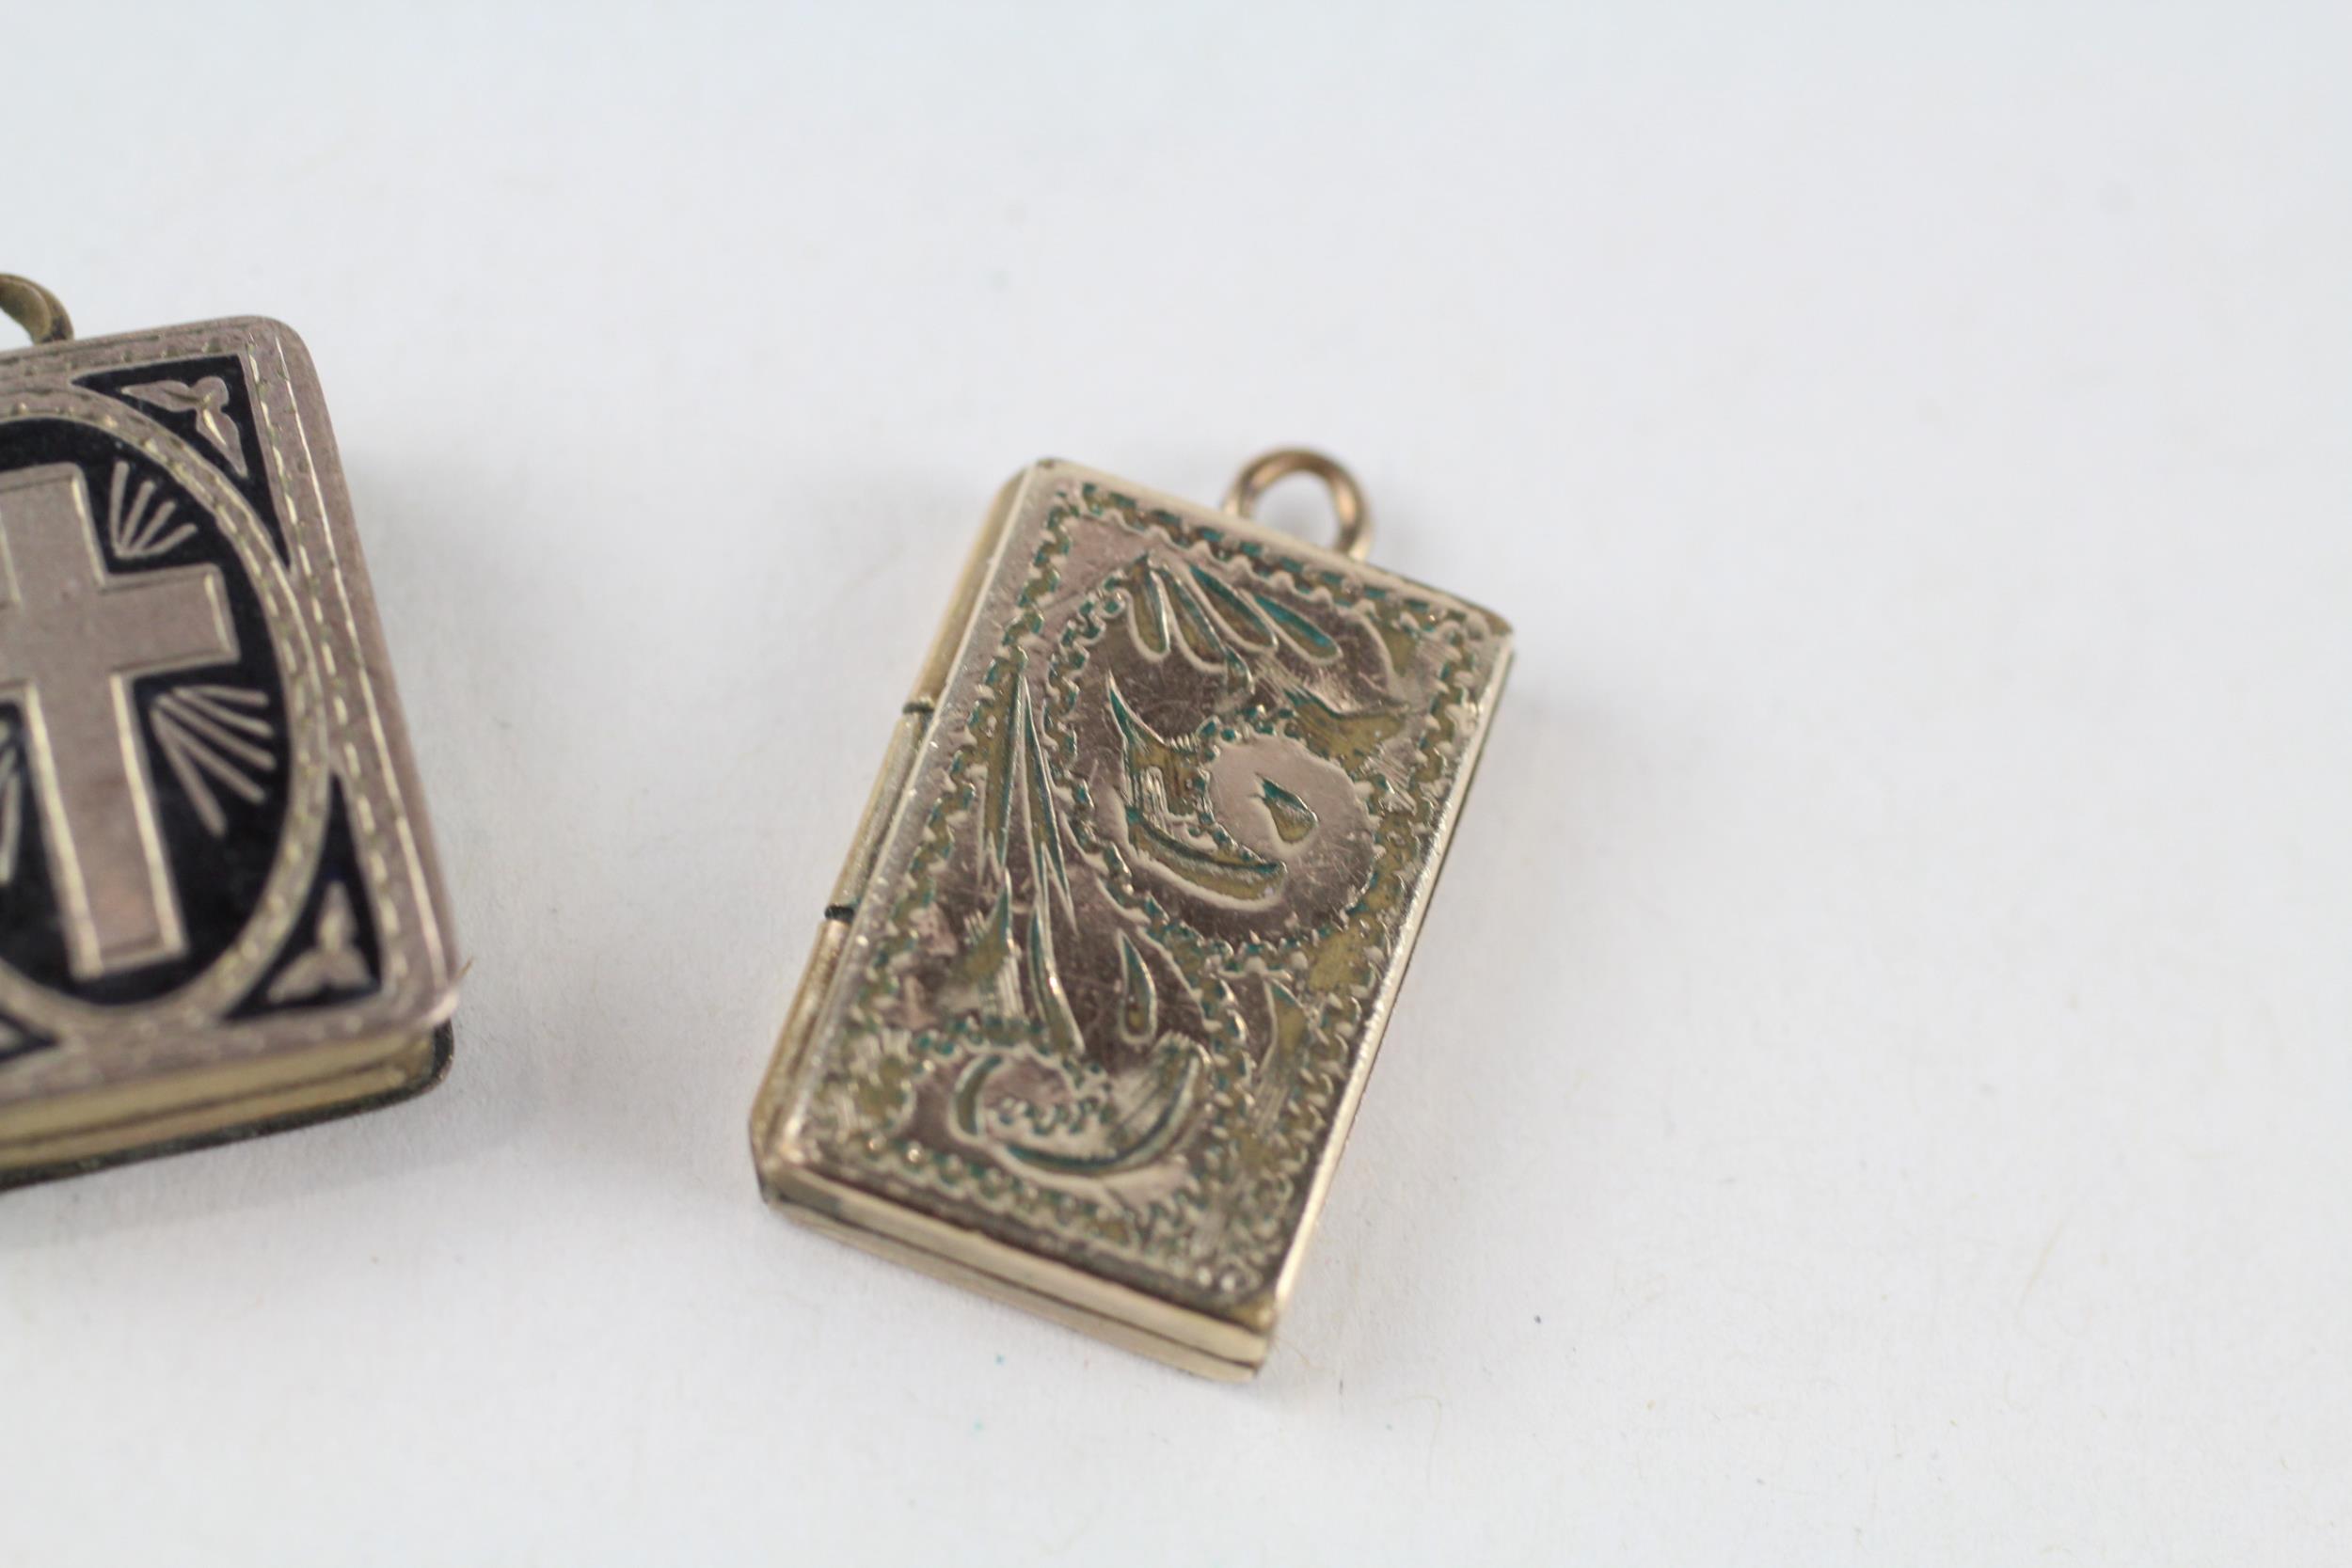 2x 9ct gold back & front antique patterned lockets (5g) - Image 2 of 4